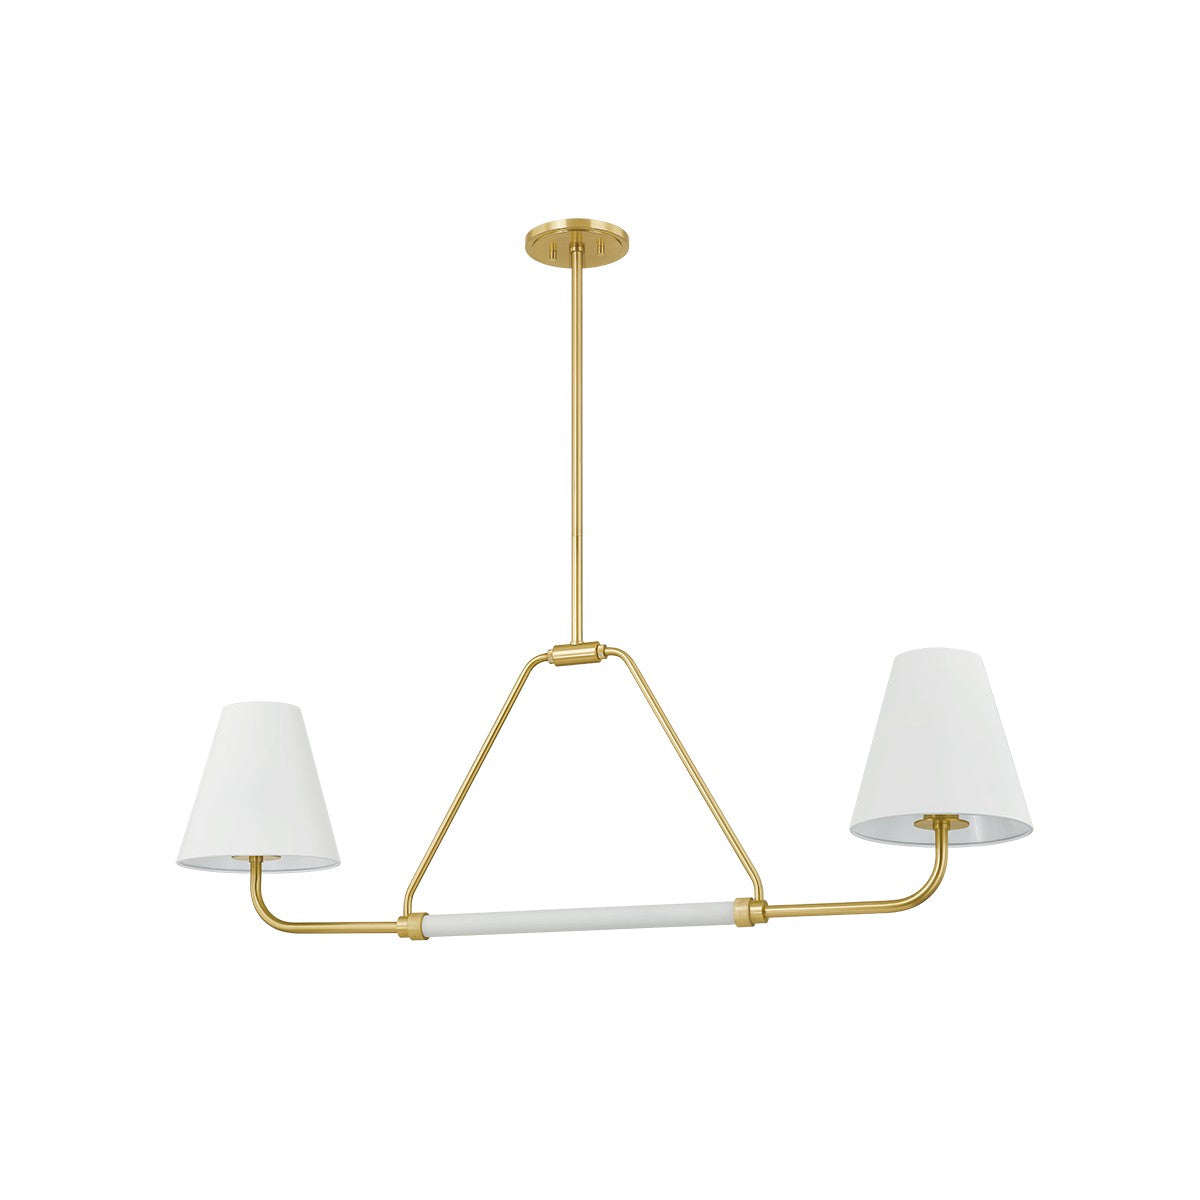 Mitzi - H891902-AGB/SWH - Two Light Linear - Georgann - Aged Brass/Soft White